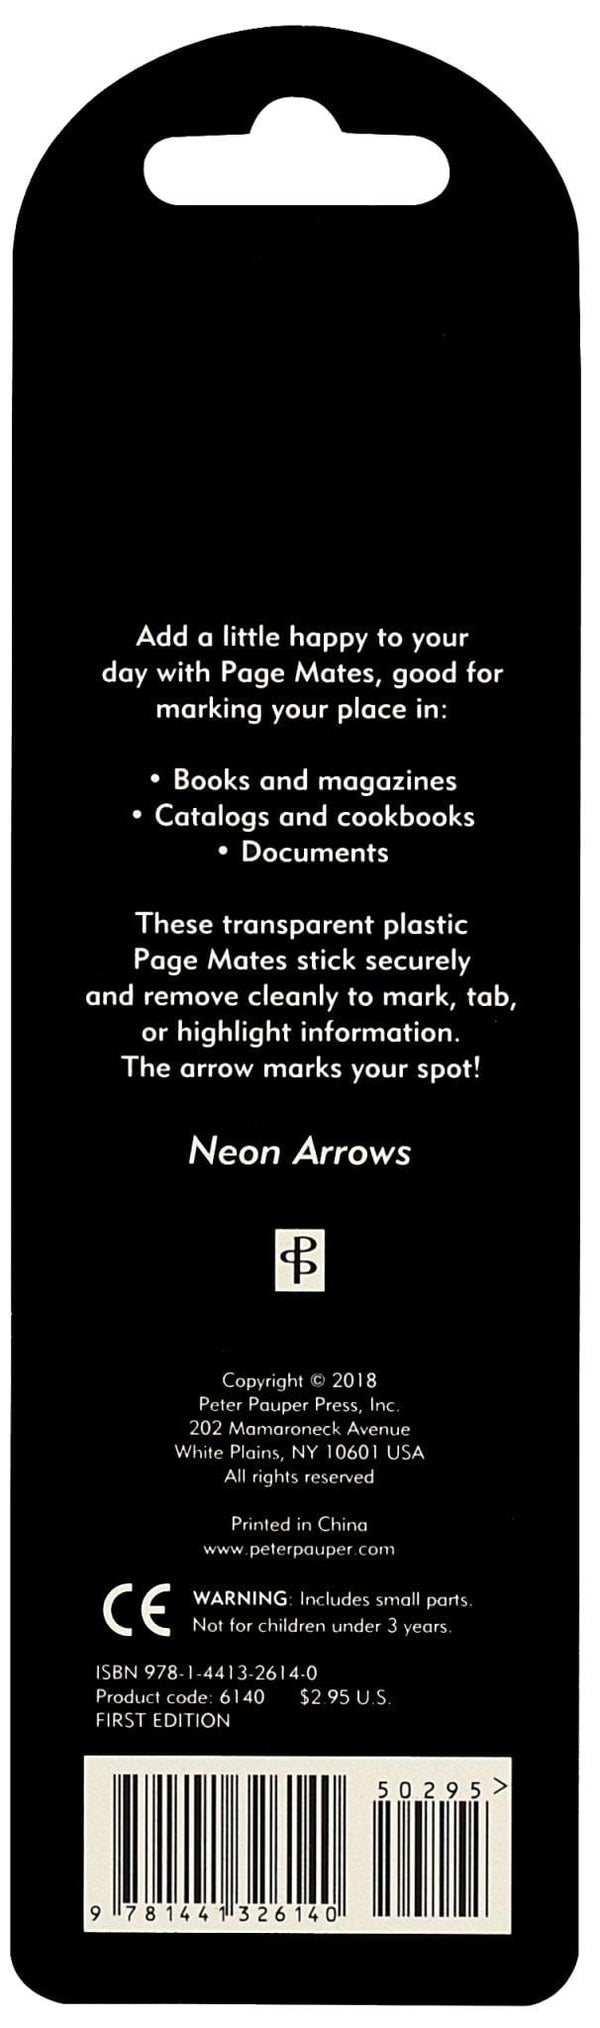 Page Flags Neon Arrows Page Mates 9781441326140